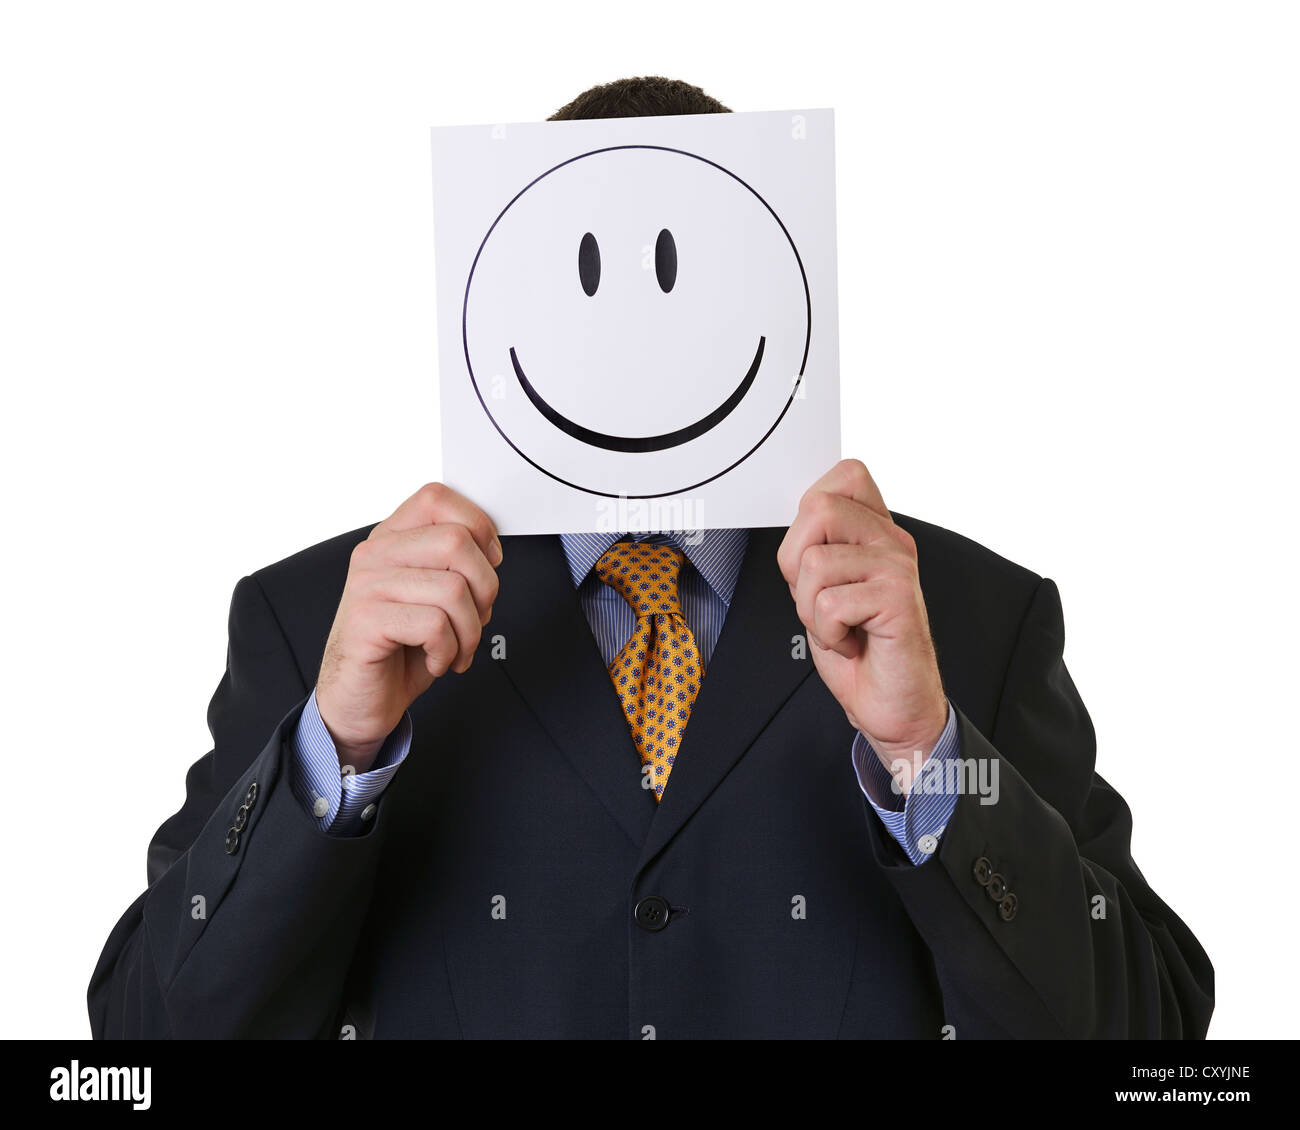 Businessman Holding a Smiley Face Stock Photo